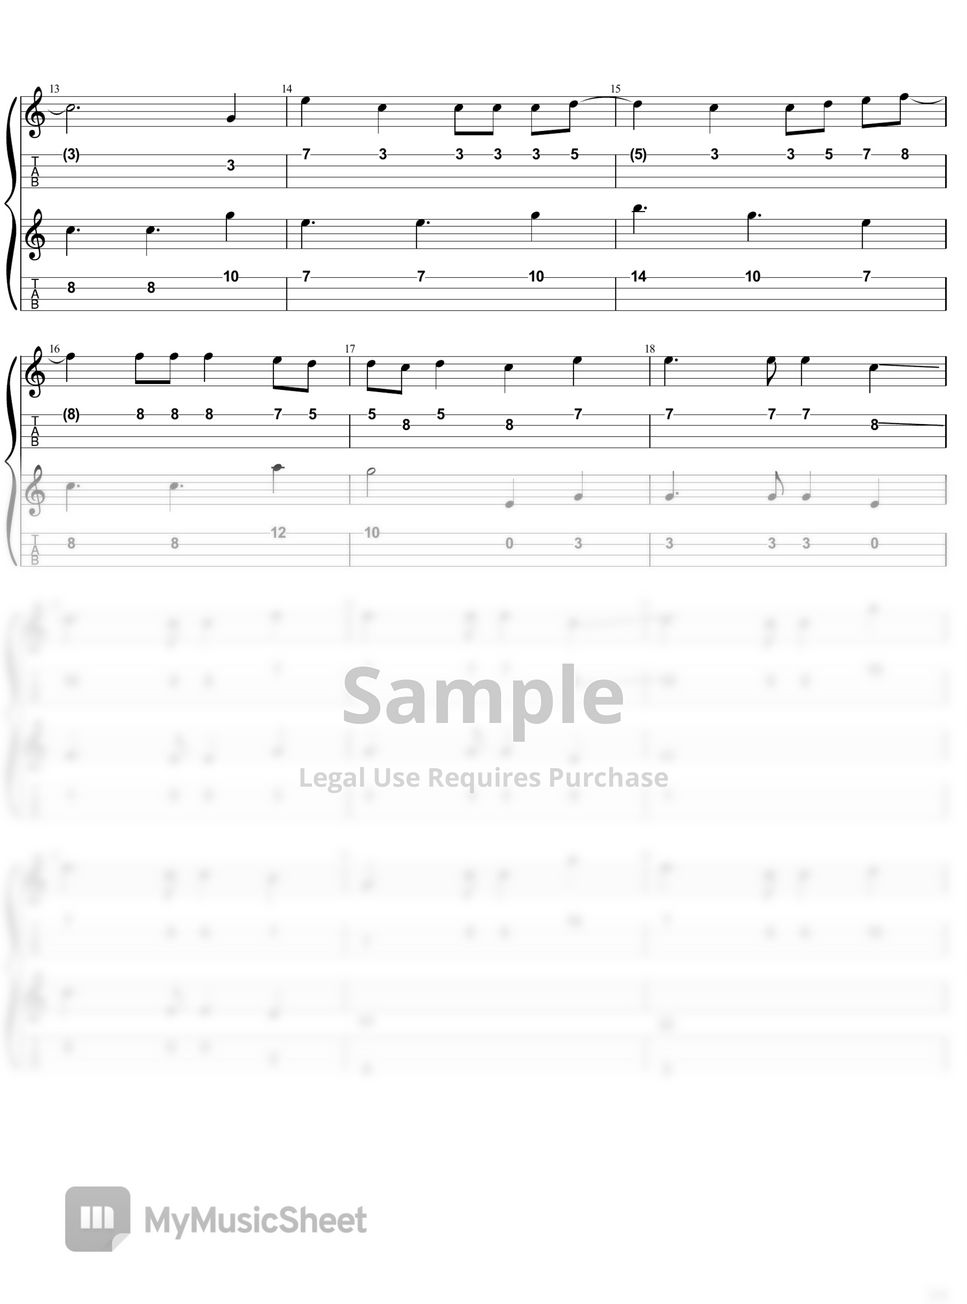 BTS - Spring Day (1st,2nd,3rd,4th) Ukulele TAB by P3